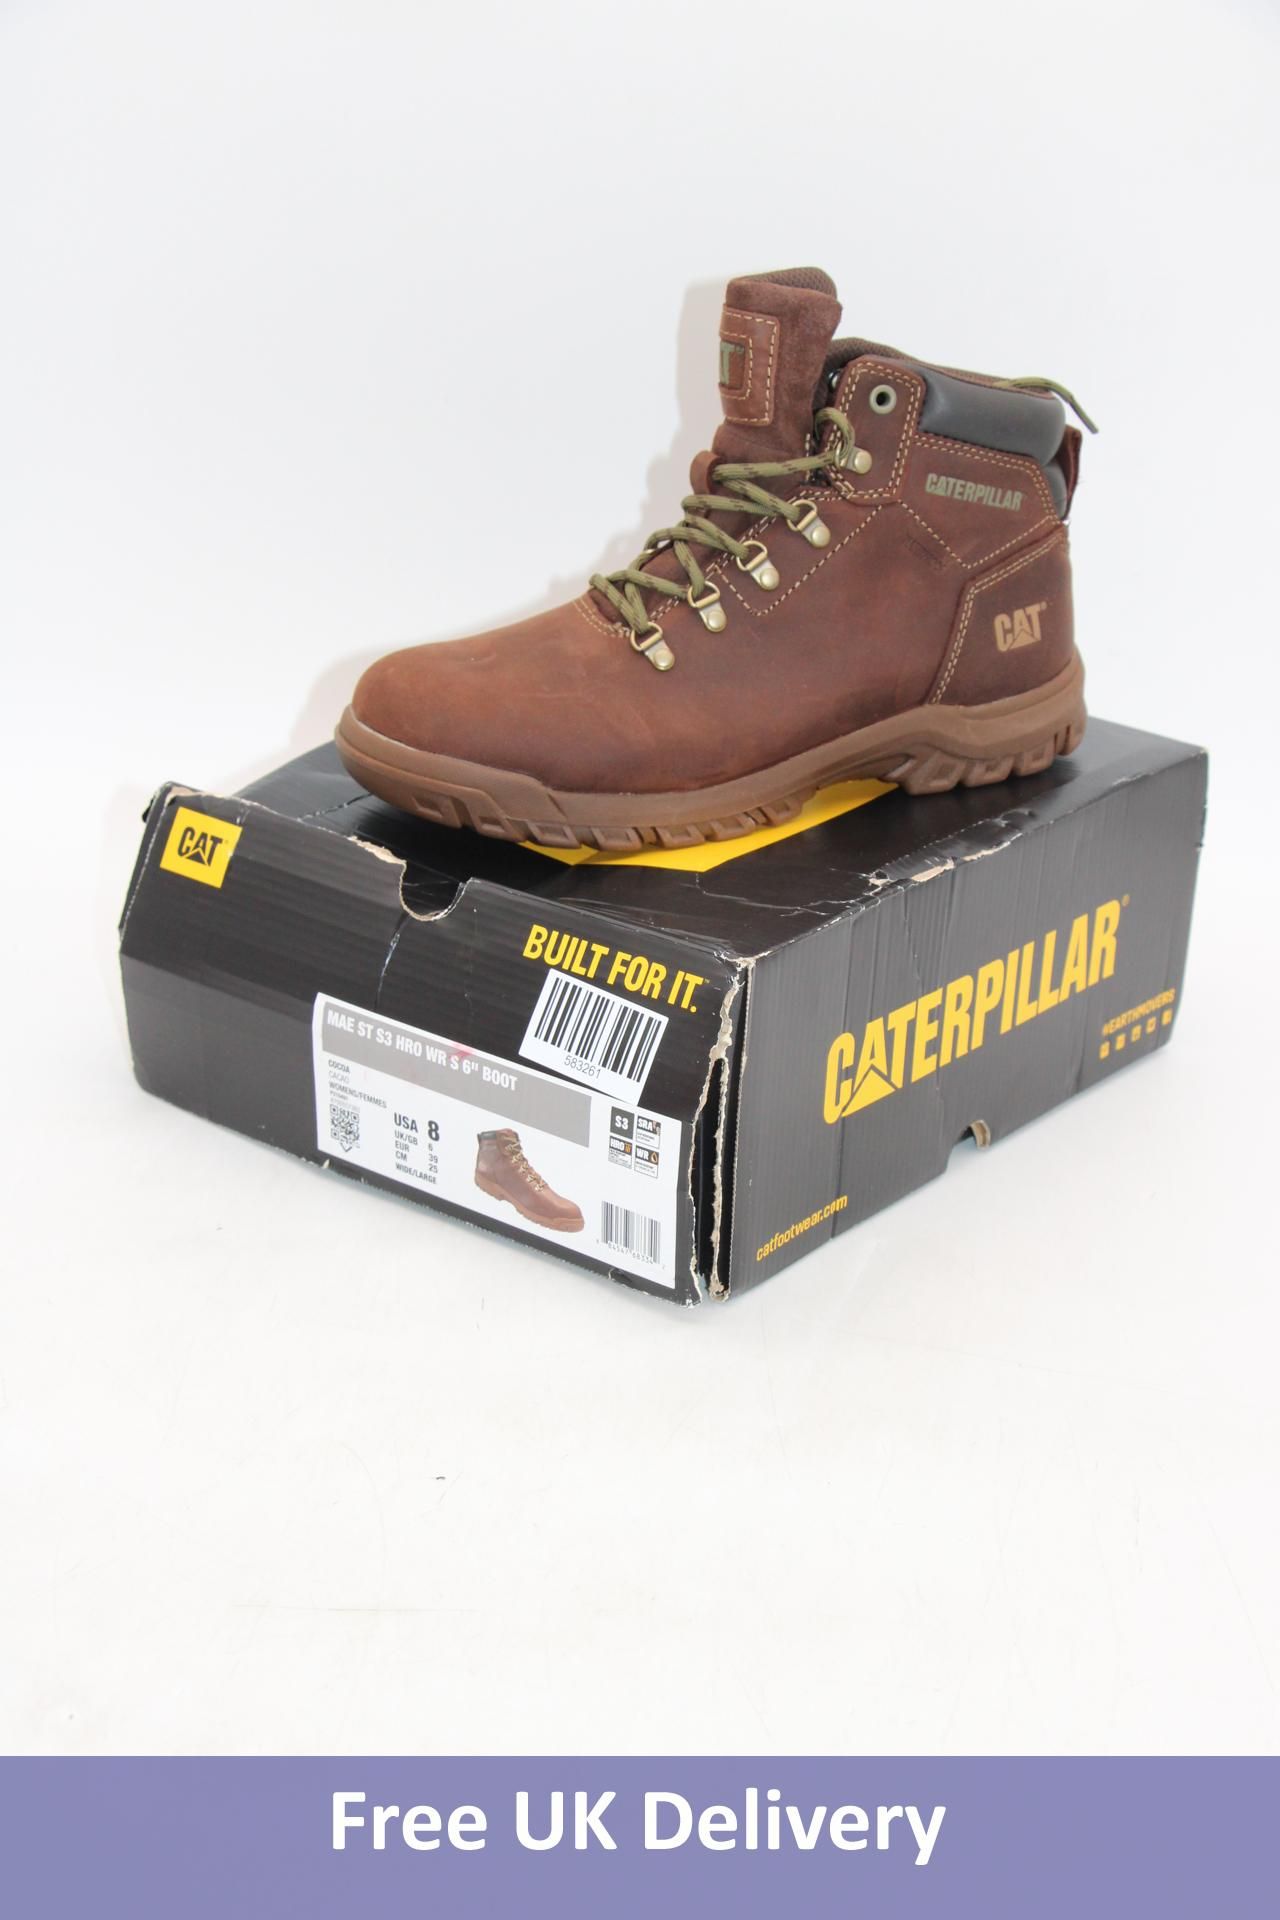 CAT Mae ST S3 HRO WR Safety Boots, Brown, UK 6. Box damaged